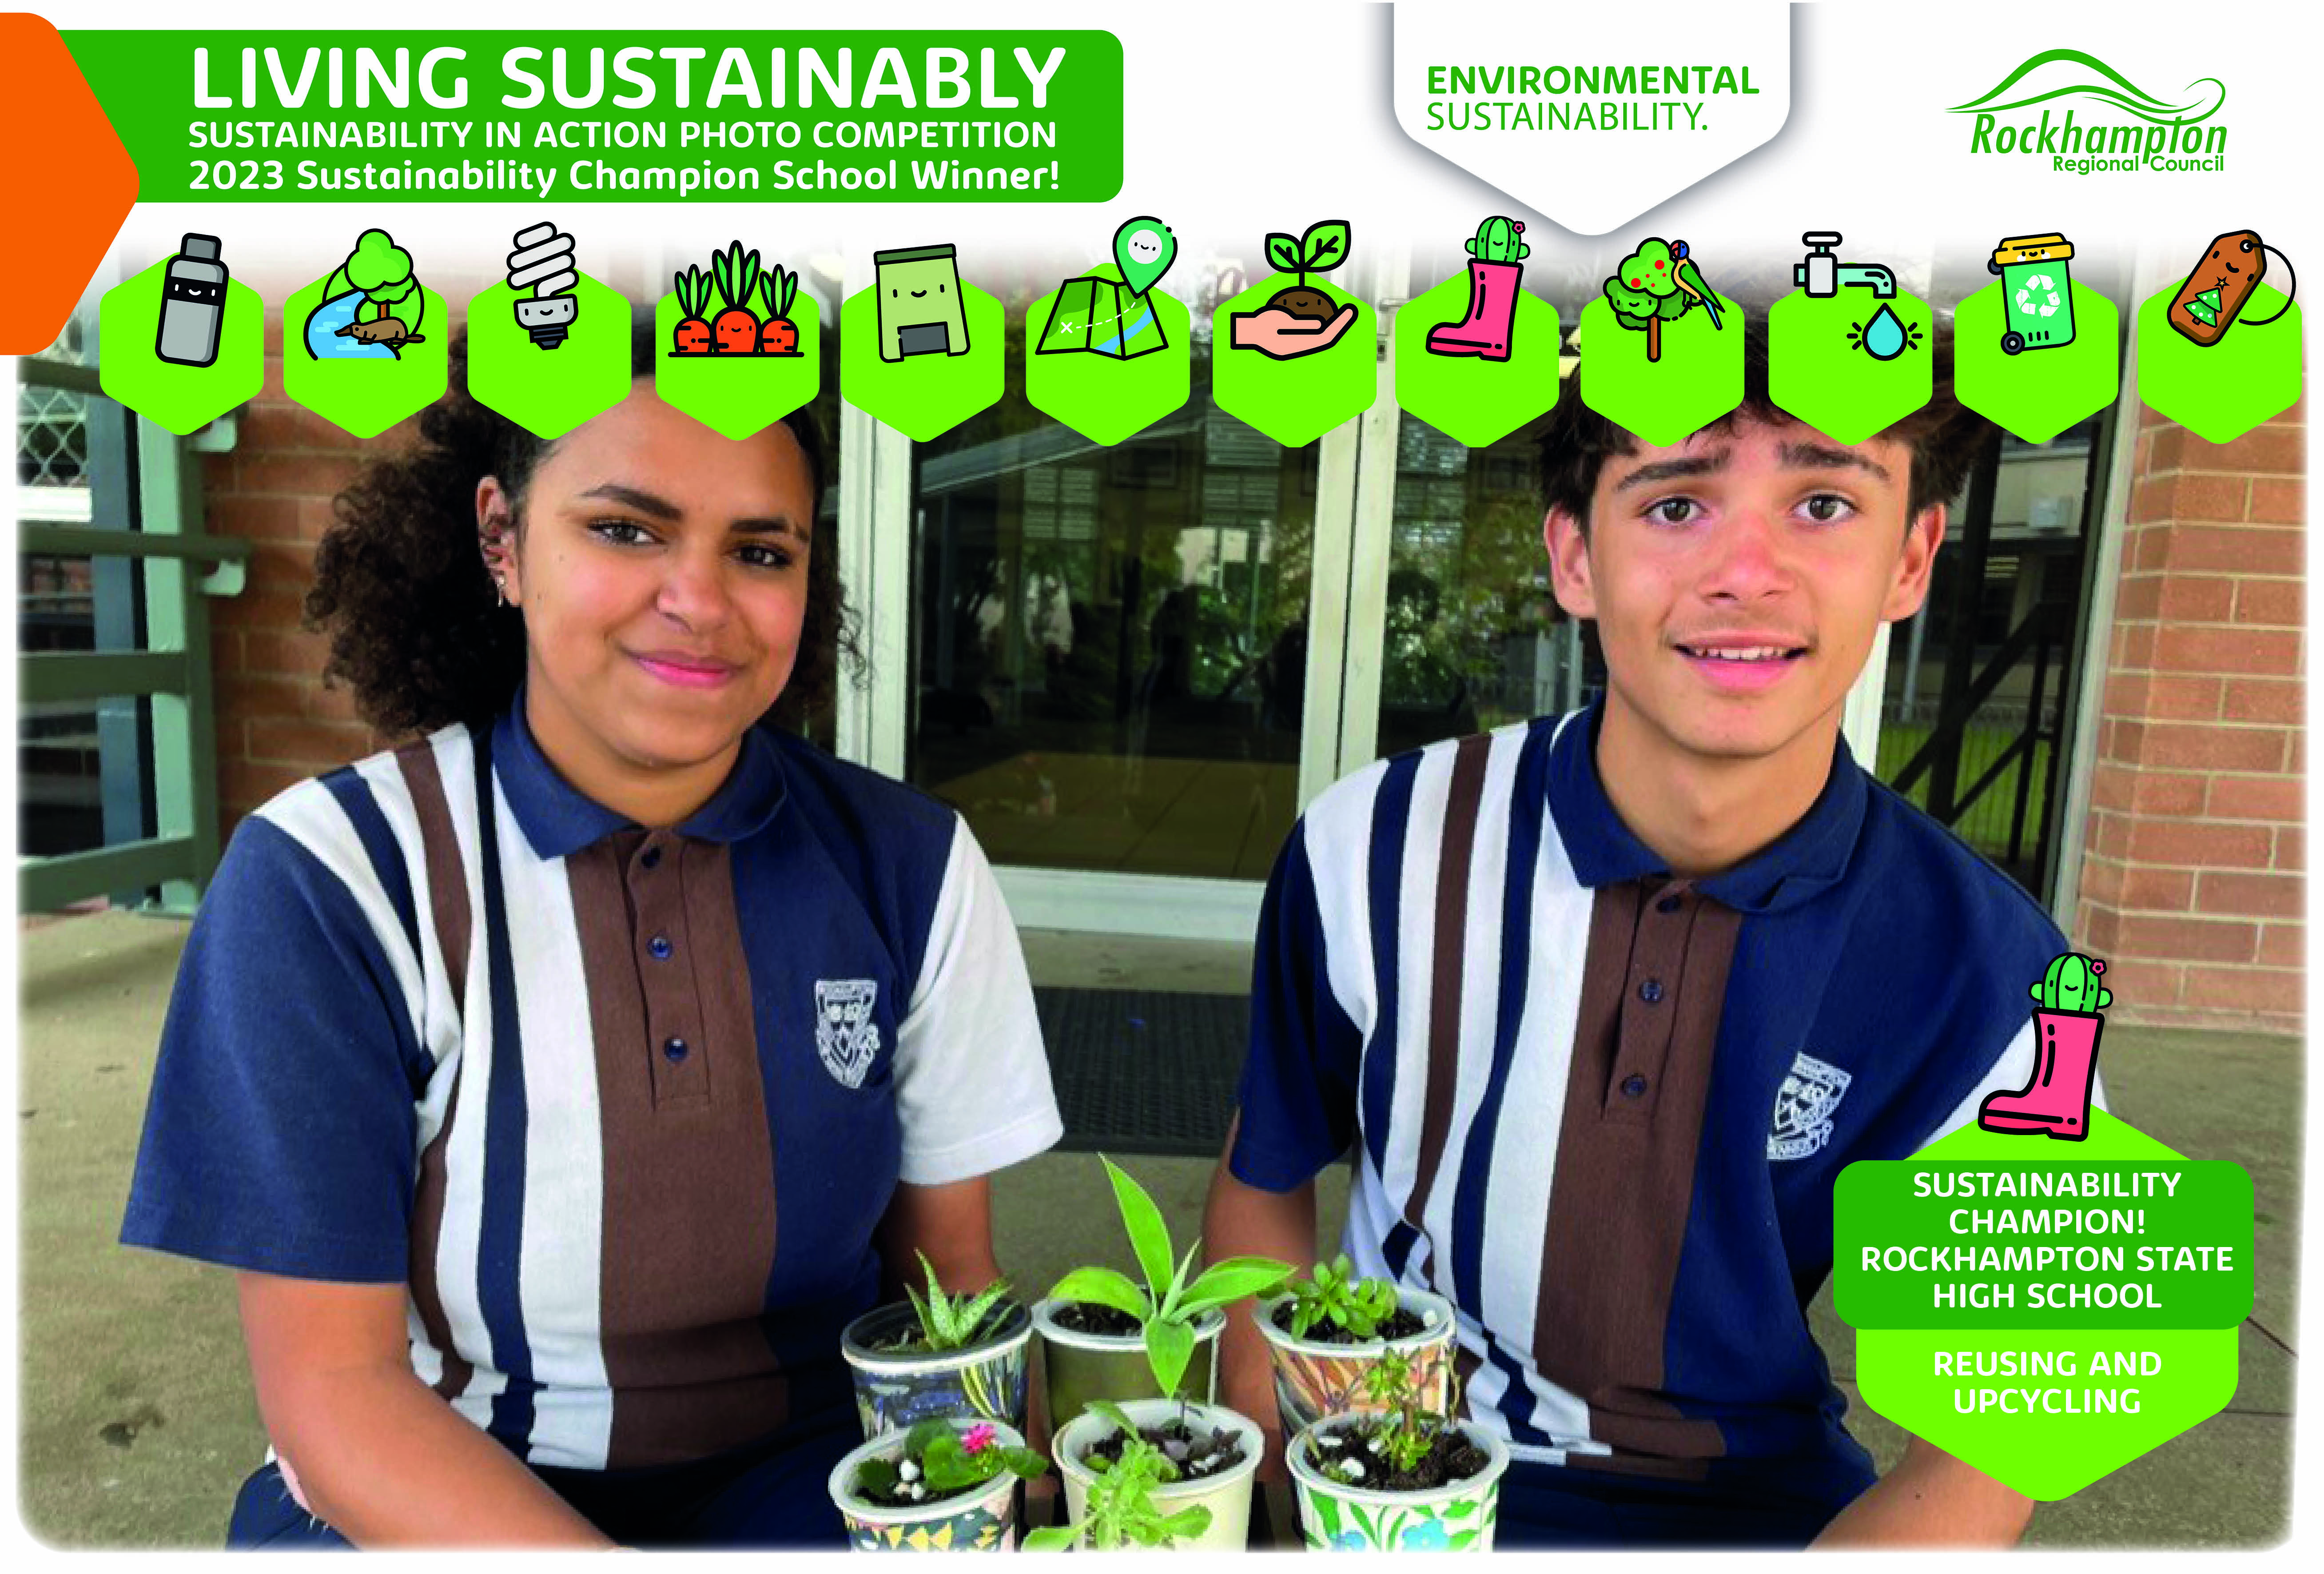 2023-SCHOOL-Sustainability-in-Action-Photo-Comp-Rton-State-High-School